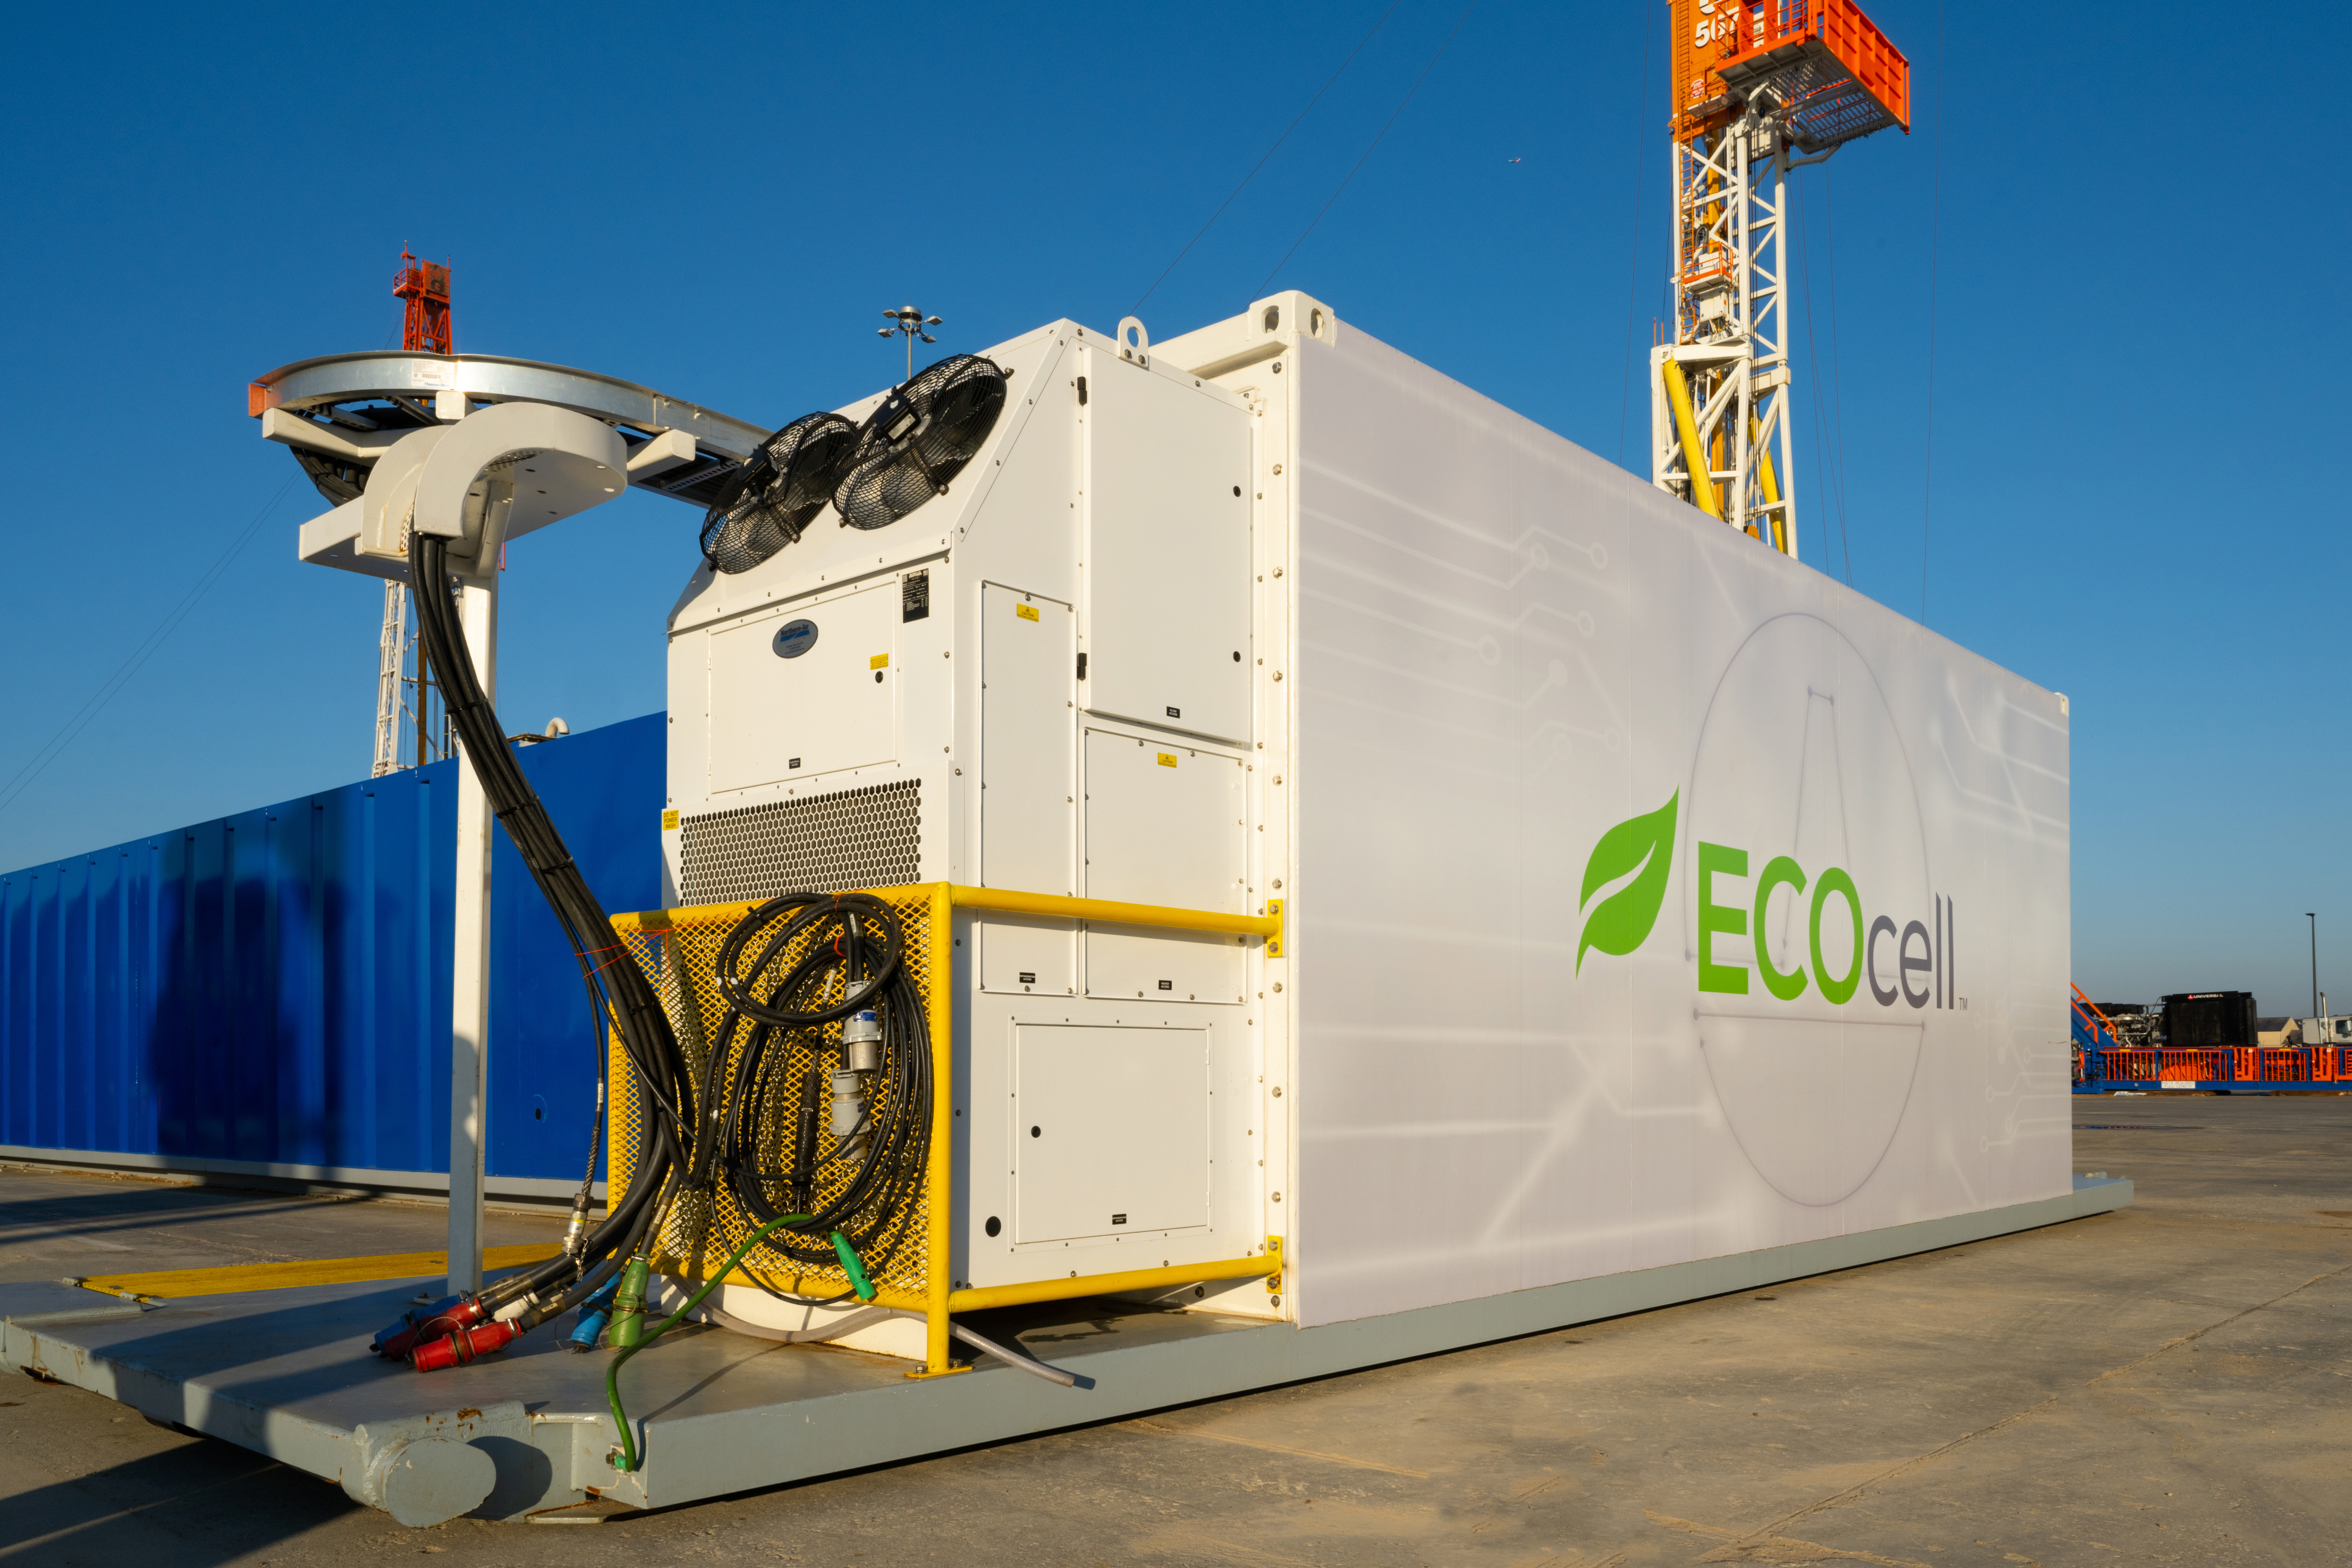 eco-cell in the middle of a land rig